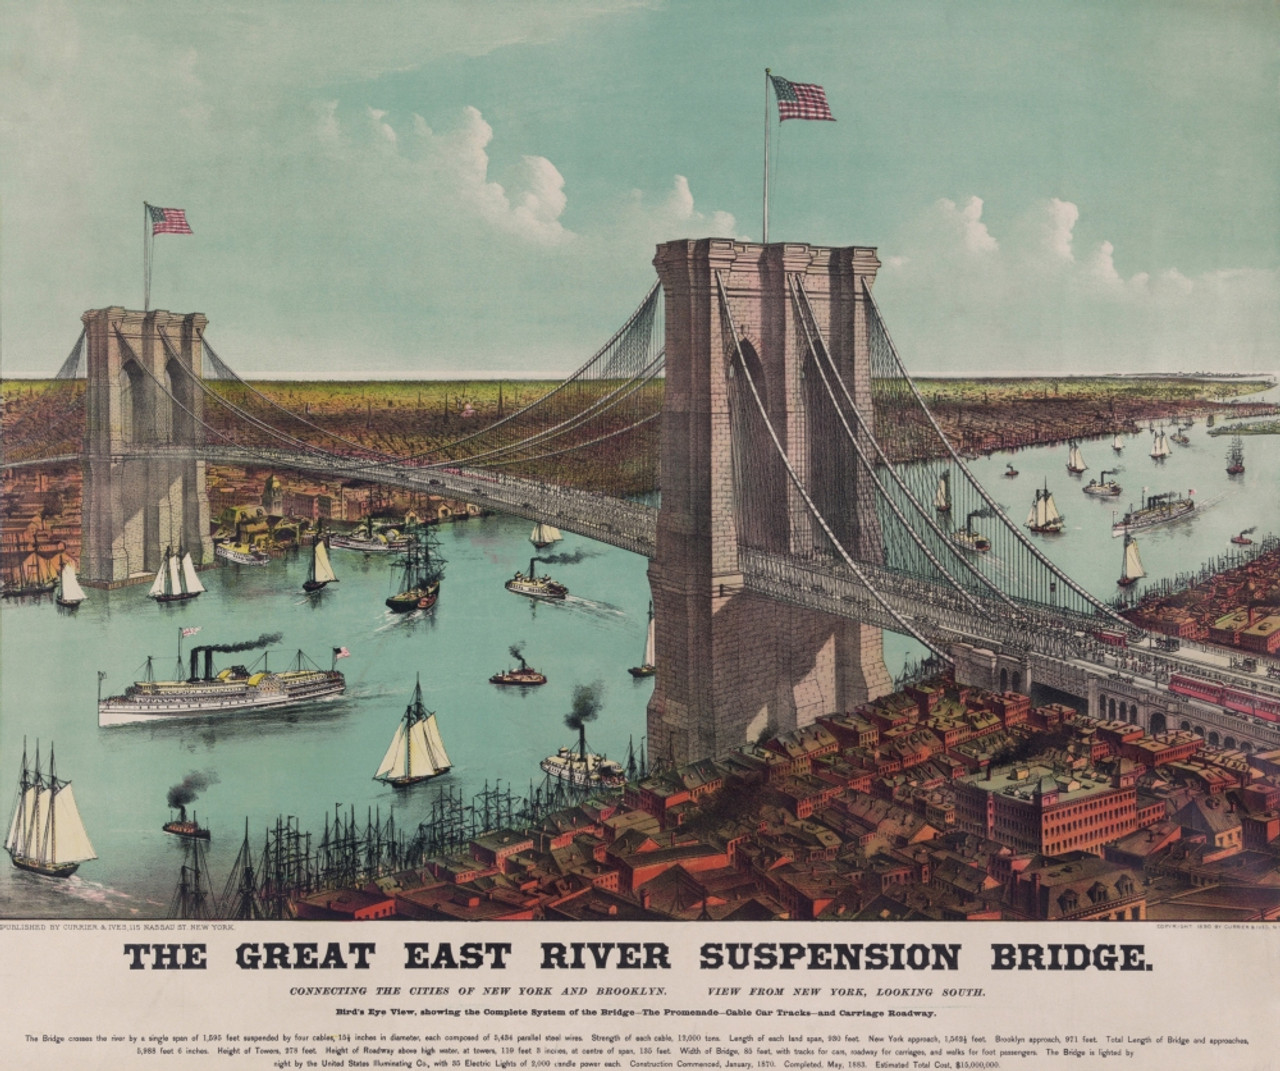 The Brooklyn Bridge Viewed By Ives. Brooklyn From Cable Manhattan - Item Looking The # Posterazzi Promenade Roadway. VAREVCHISL023EC020 Toward Currier - Lc-Dig-Pga-03206 Showing Tracks Carriage 1890 Car History South Chromolithograph And